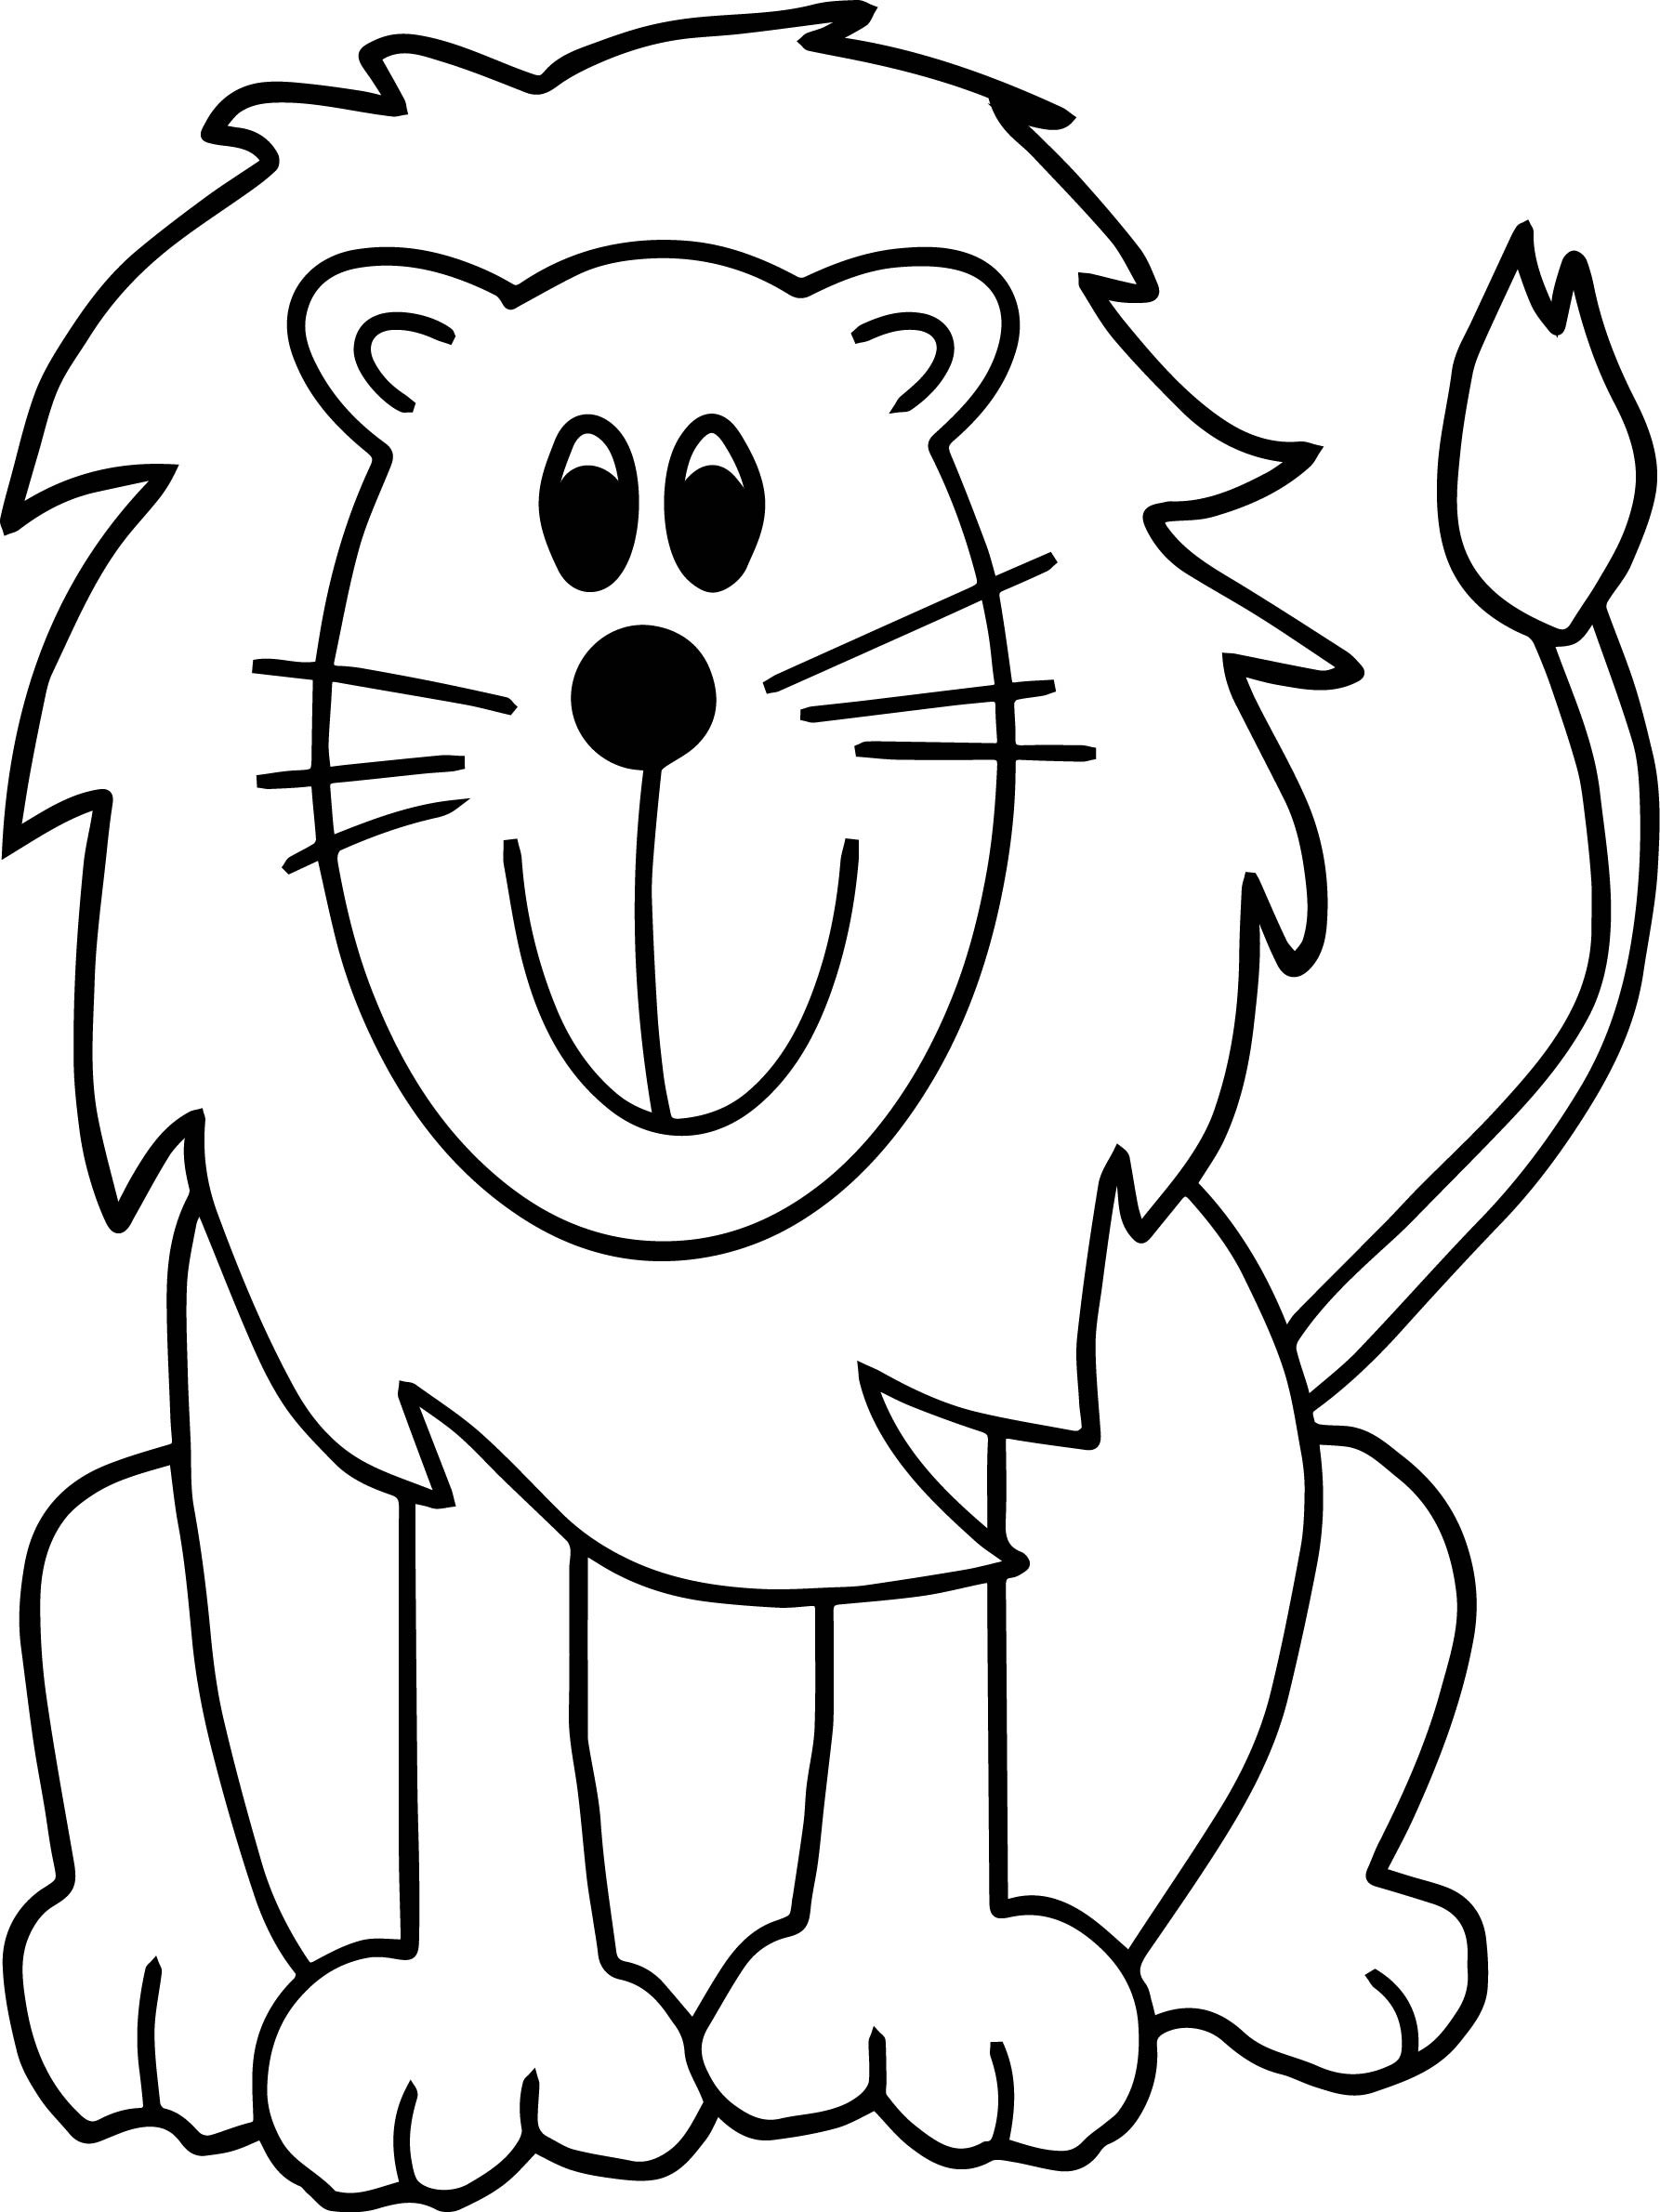 Zoo Coloring Pages at GetColorings.com | Free printable colorings pages ...